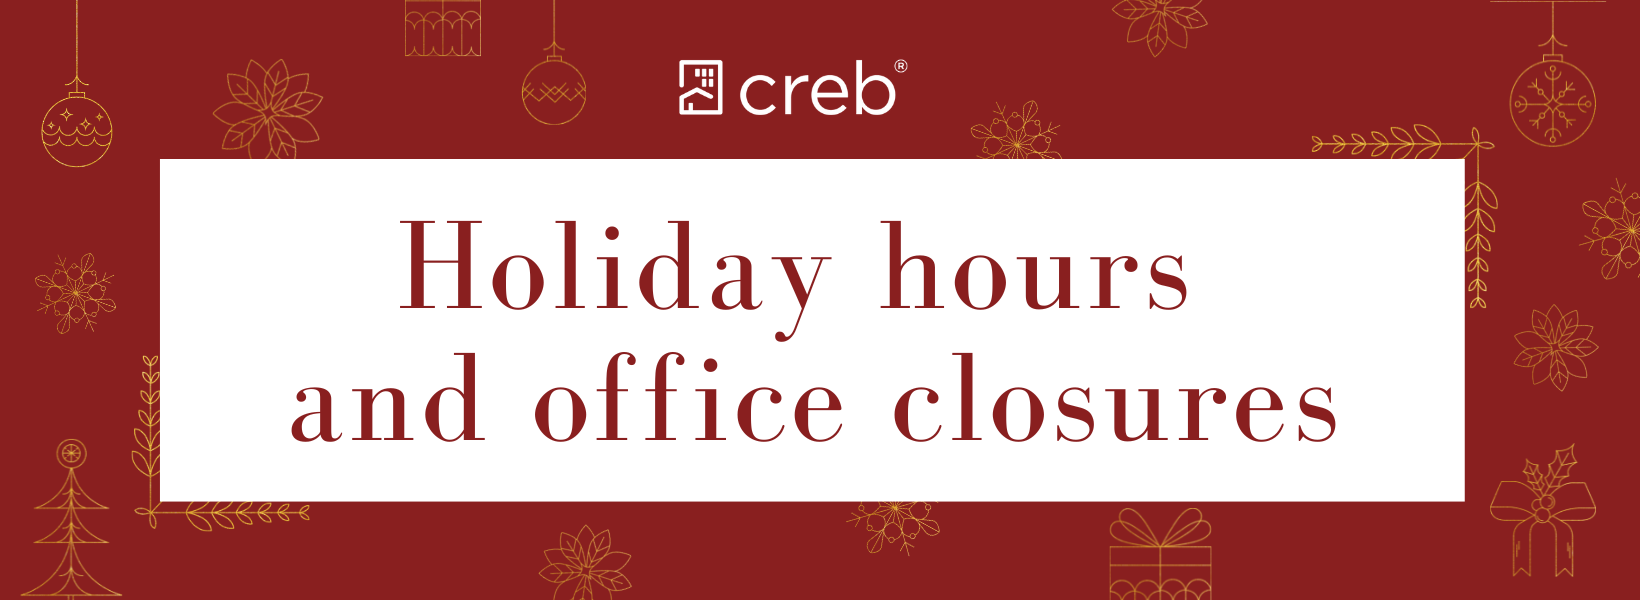 CREB Holiday Hours and office closures